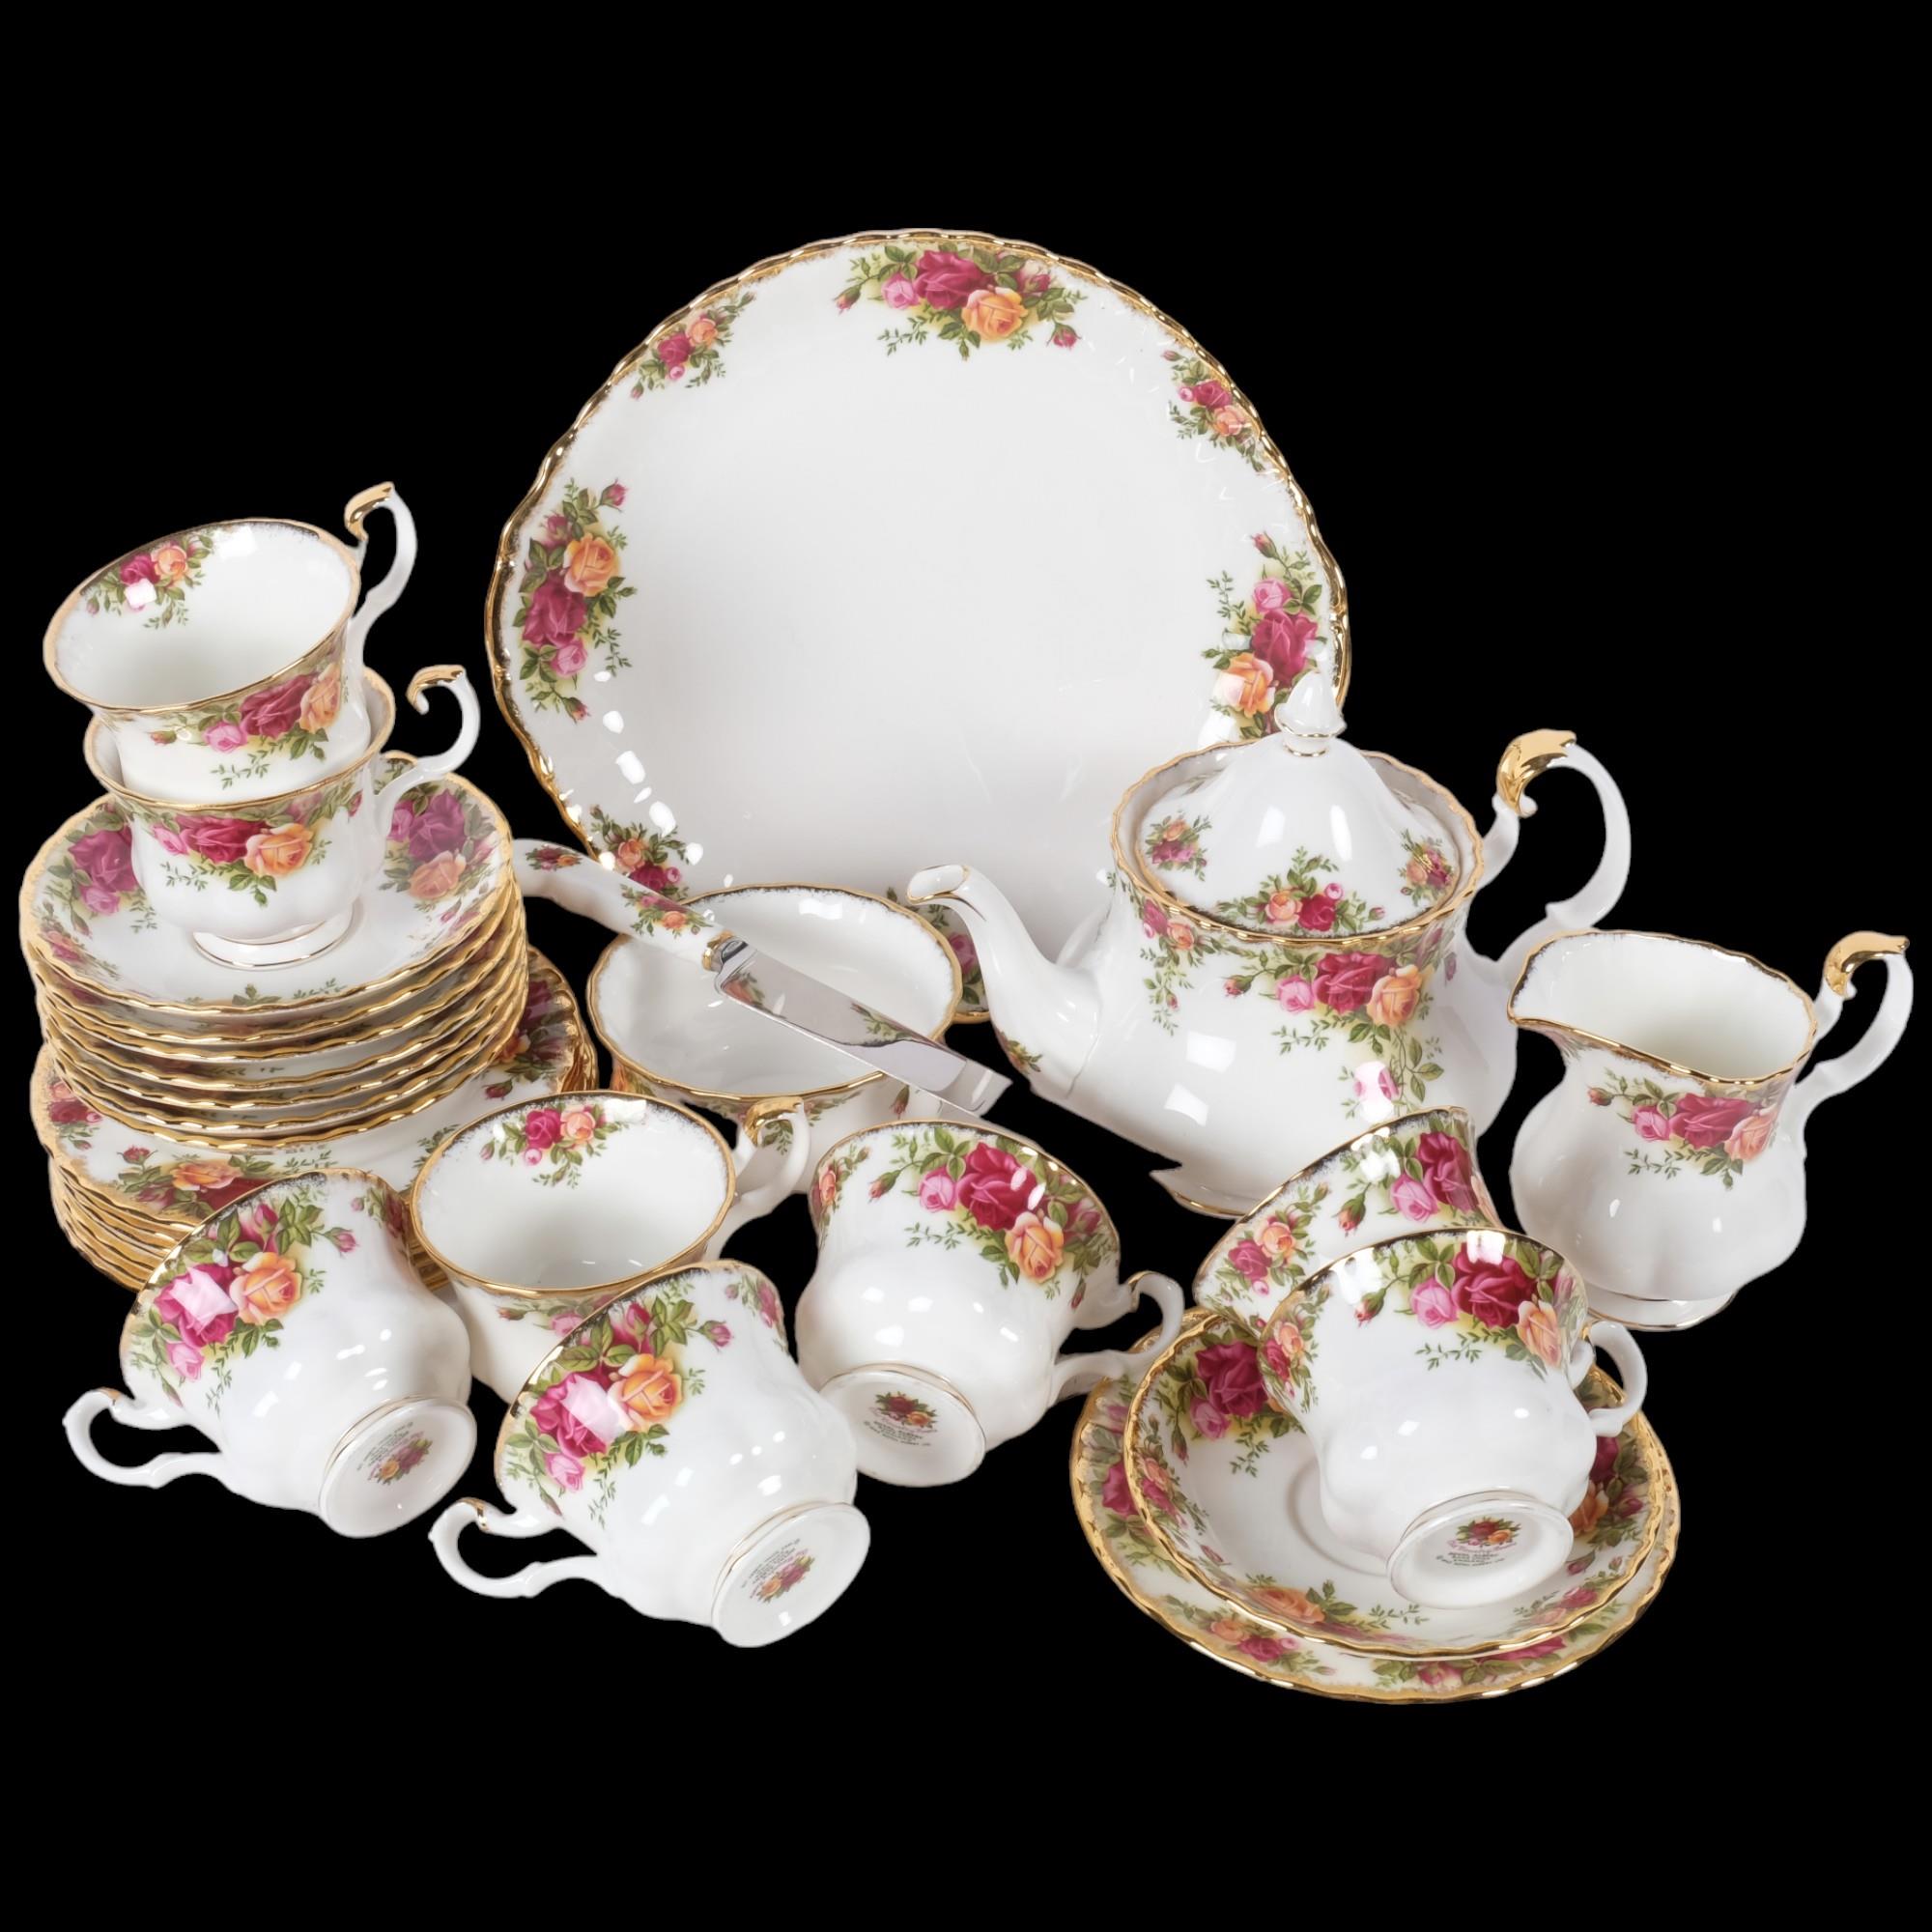 Royal Albert Old Country Roses, an 8-piece tea service, including teapot, cups, saucers and side